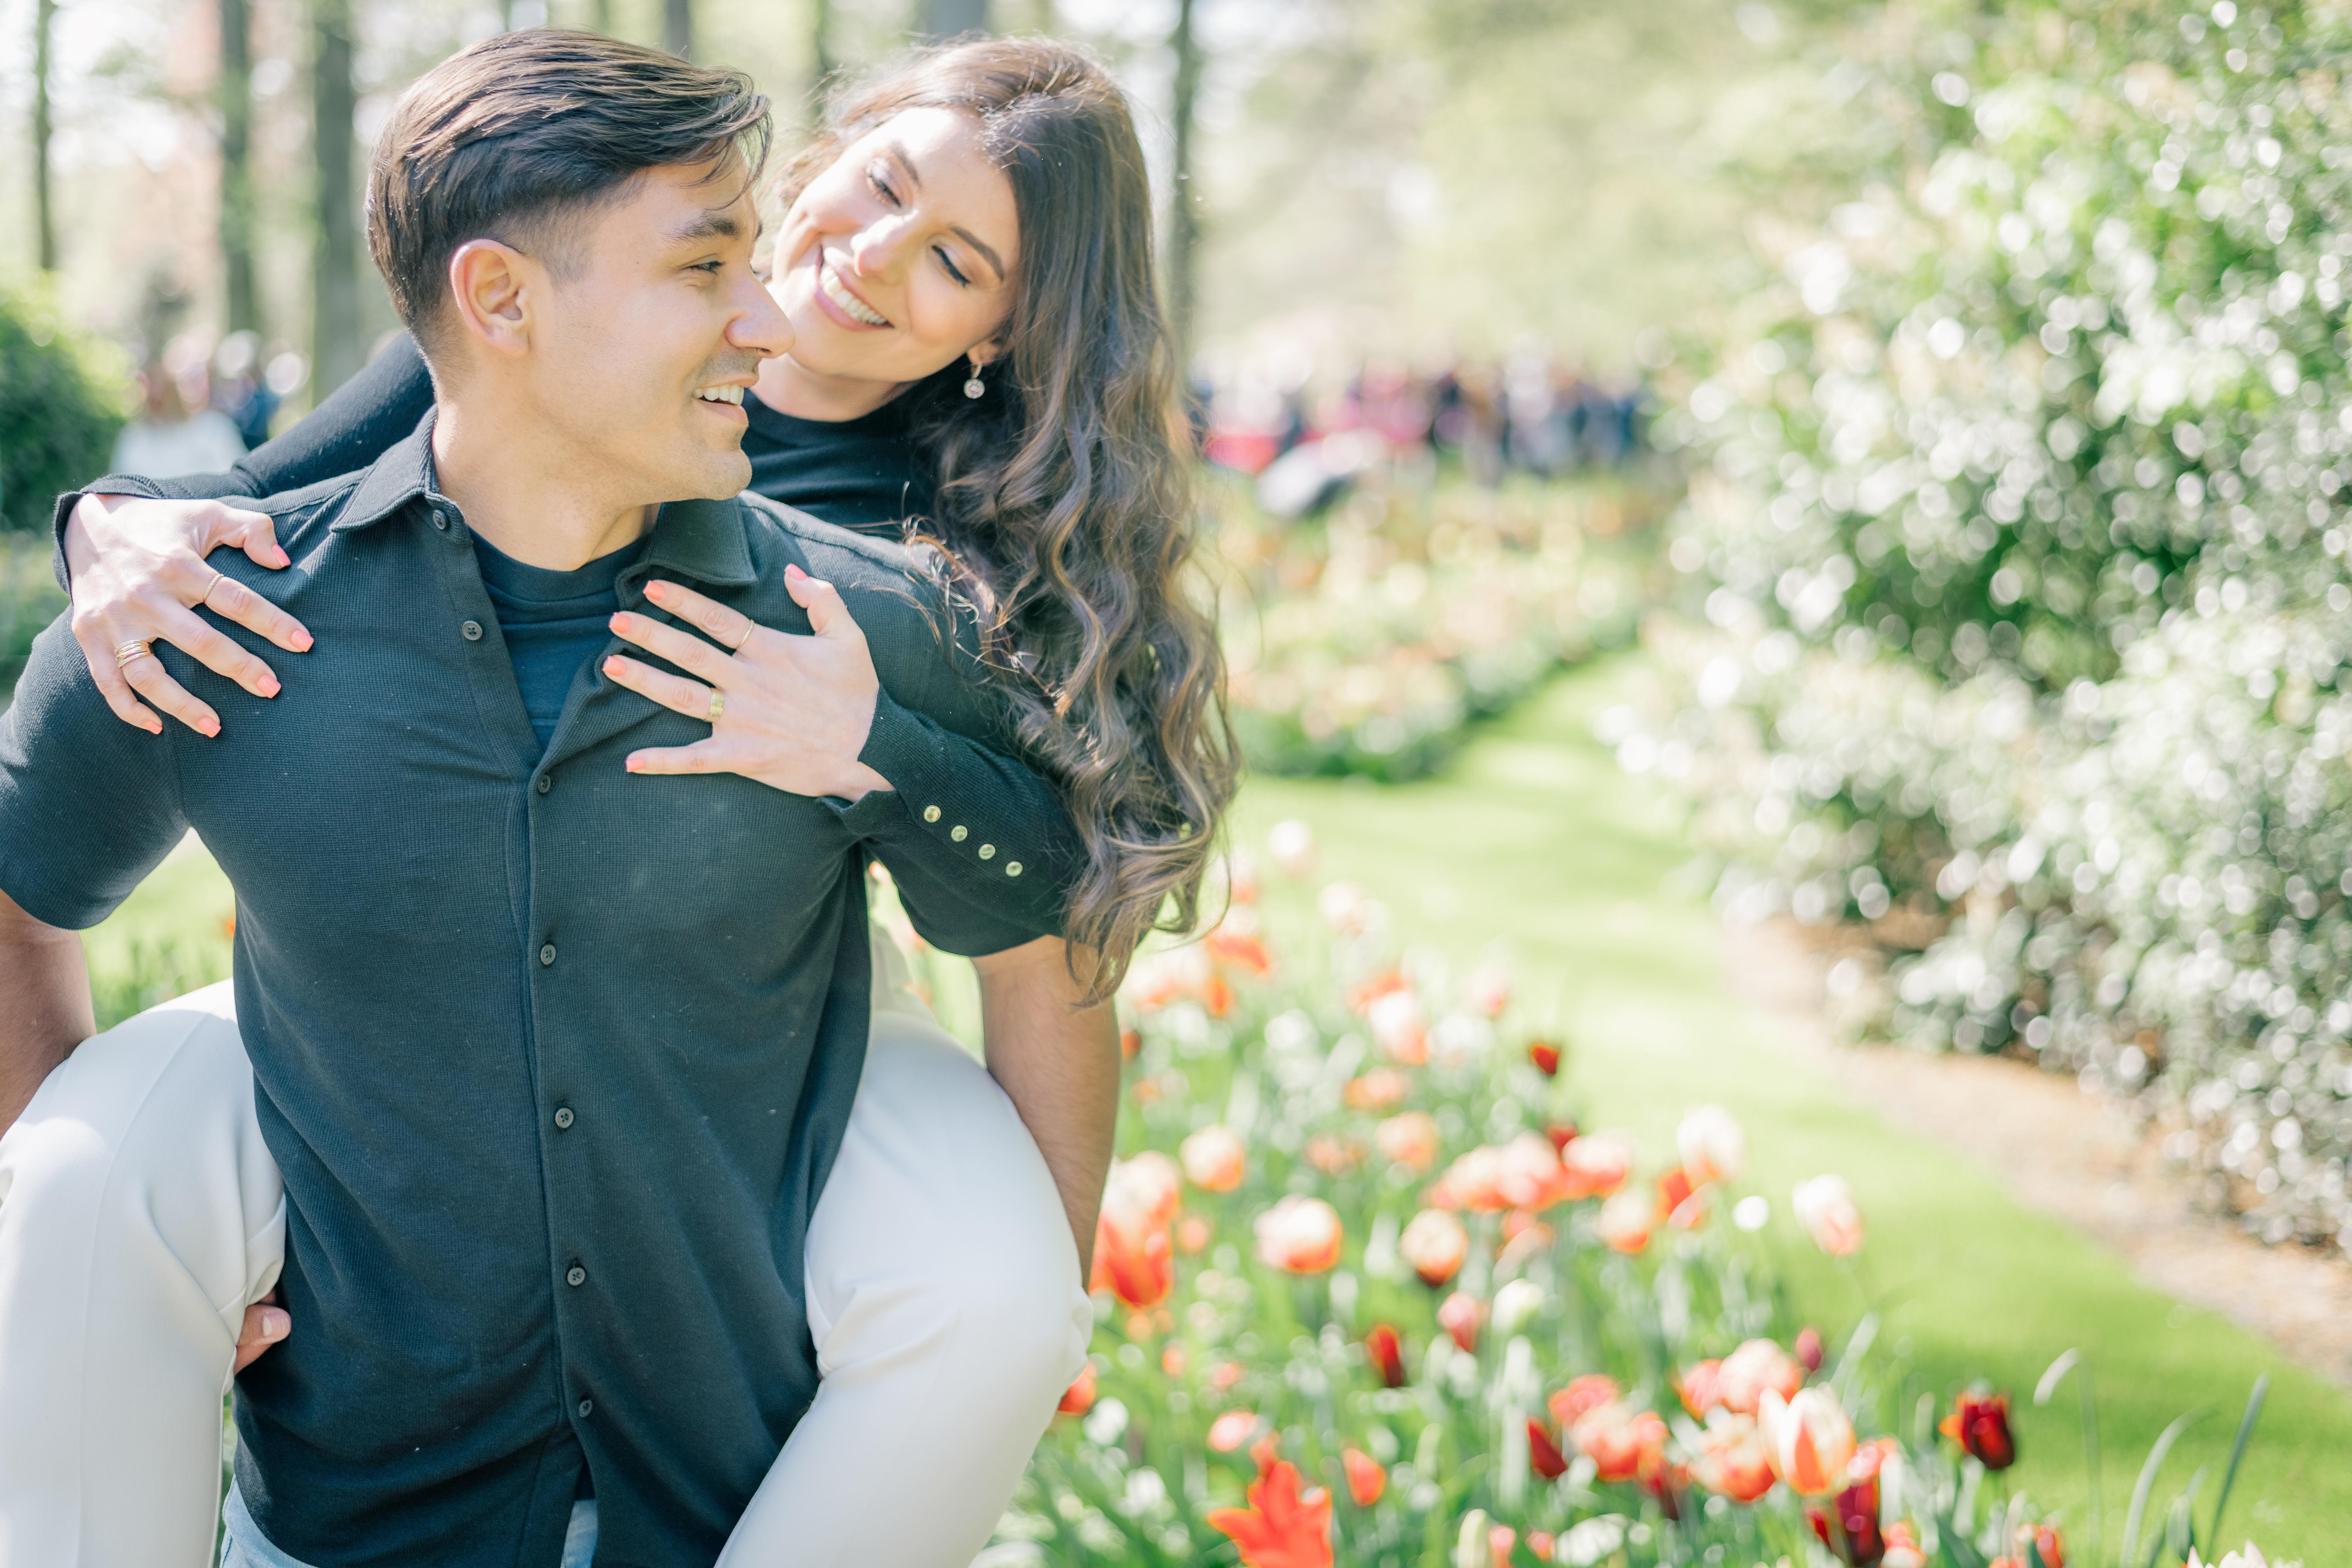 A woman rides on the back of a man and looks at him smiling while he looks back at her smiling.  They are standing in a garden full of tulips and other blooms